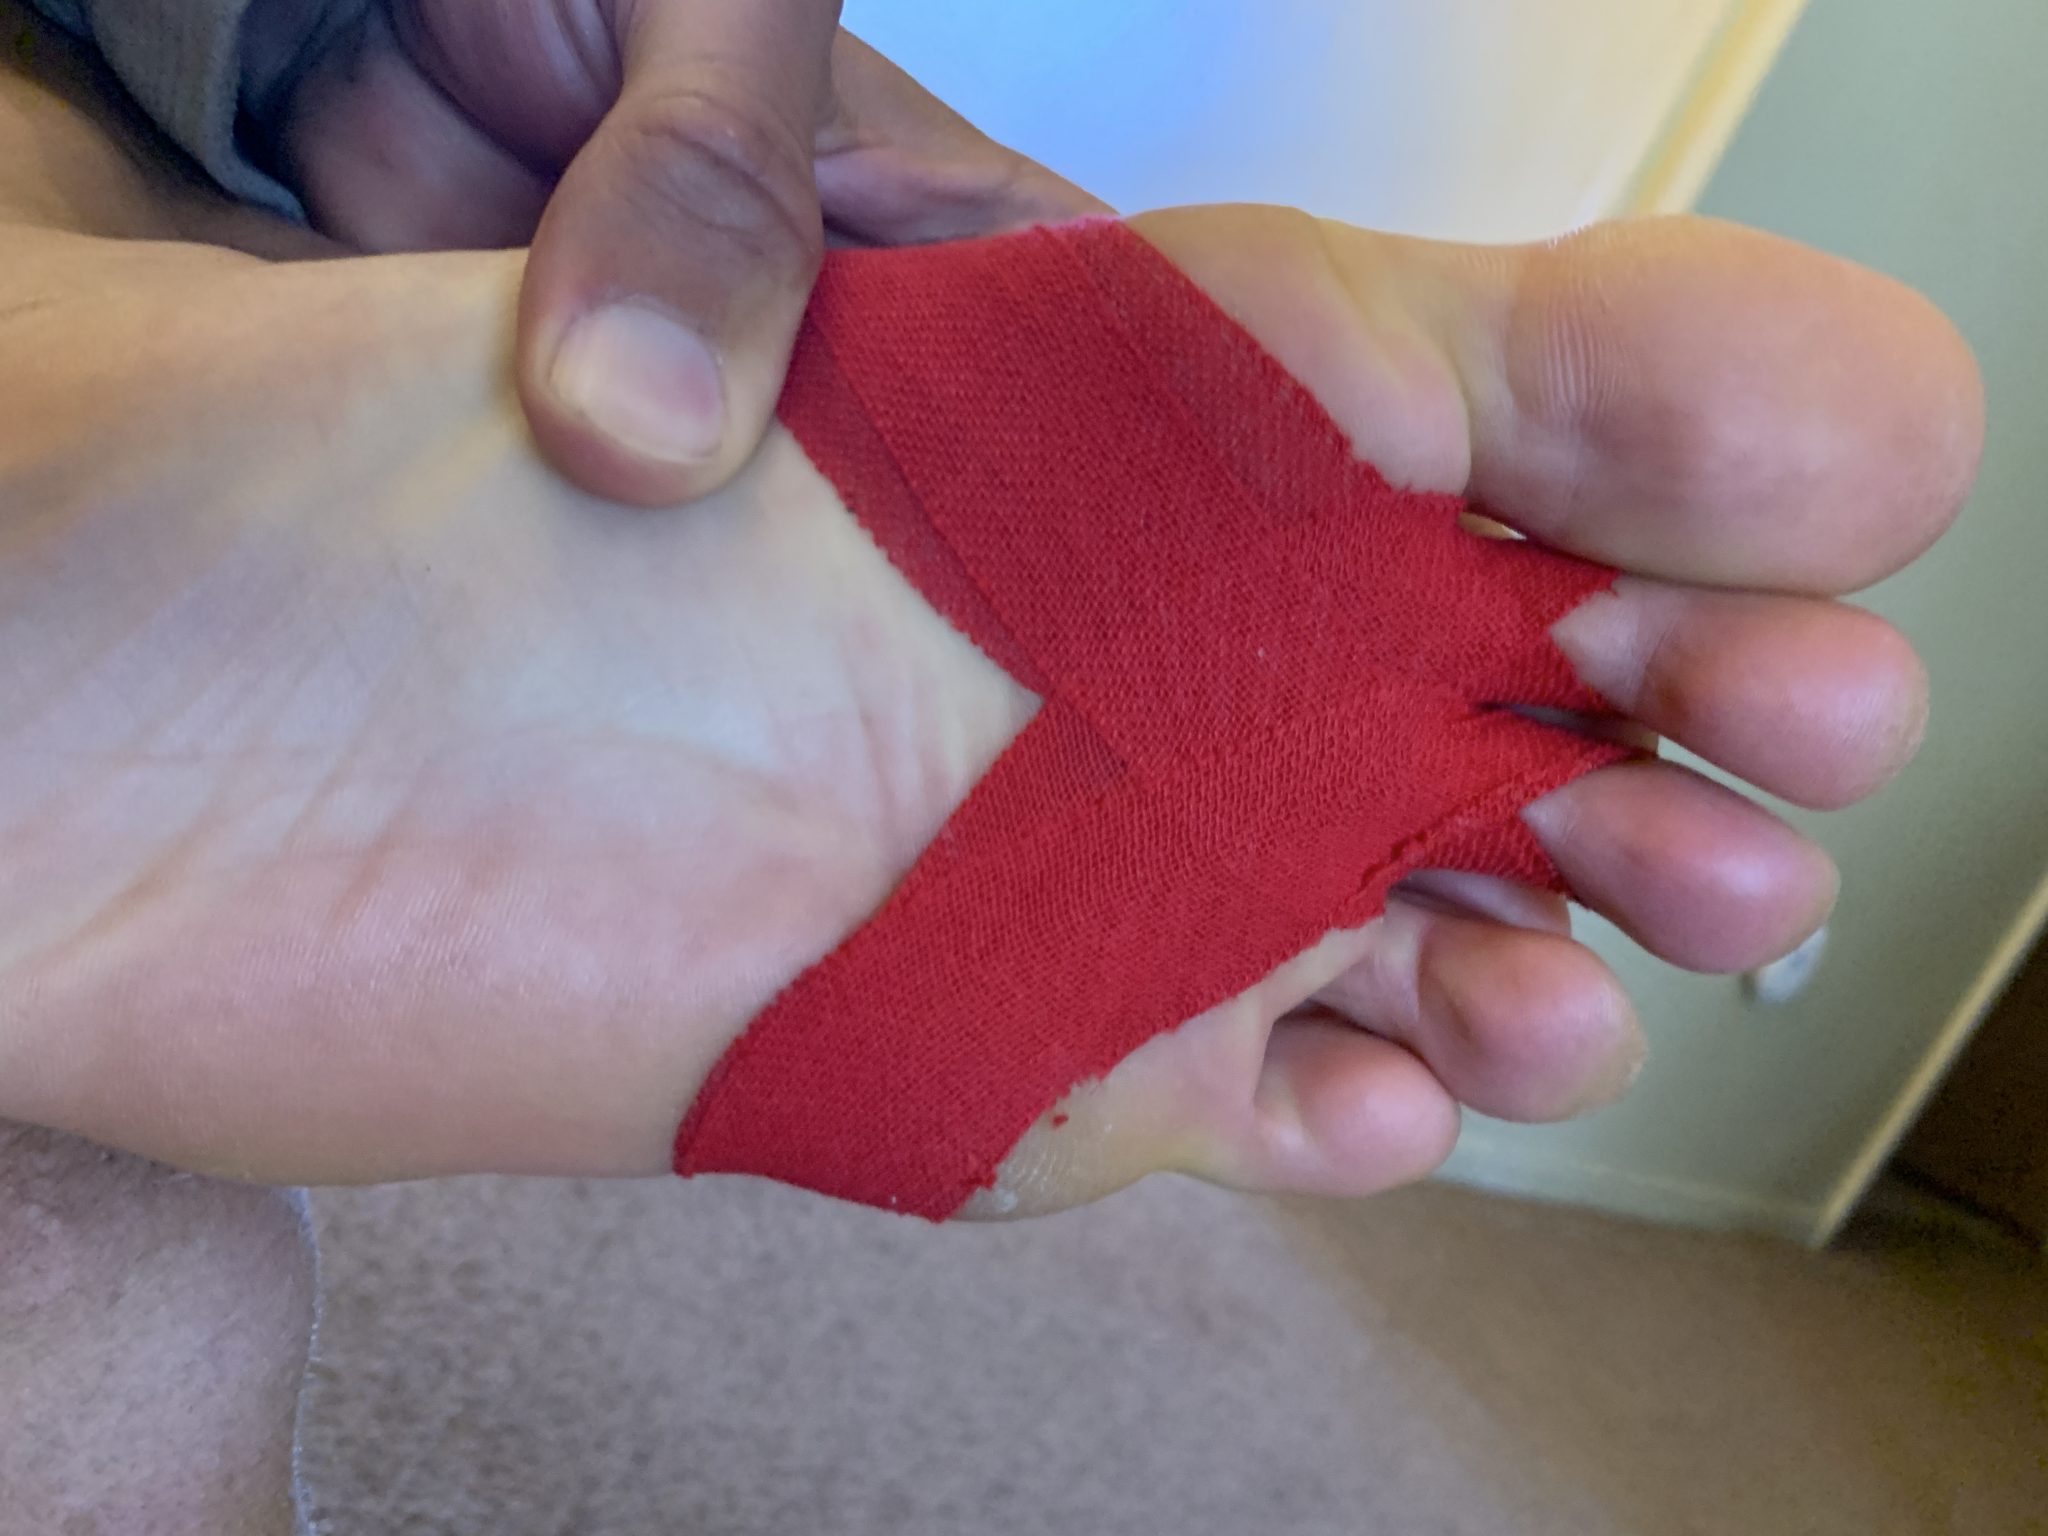 How To Tape Toes for Plantar Plate Tear Plantar Health